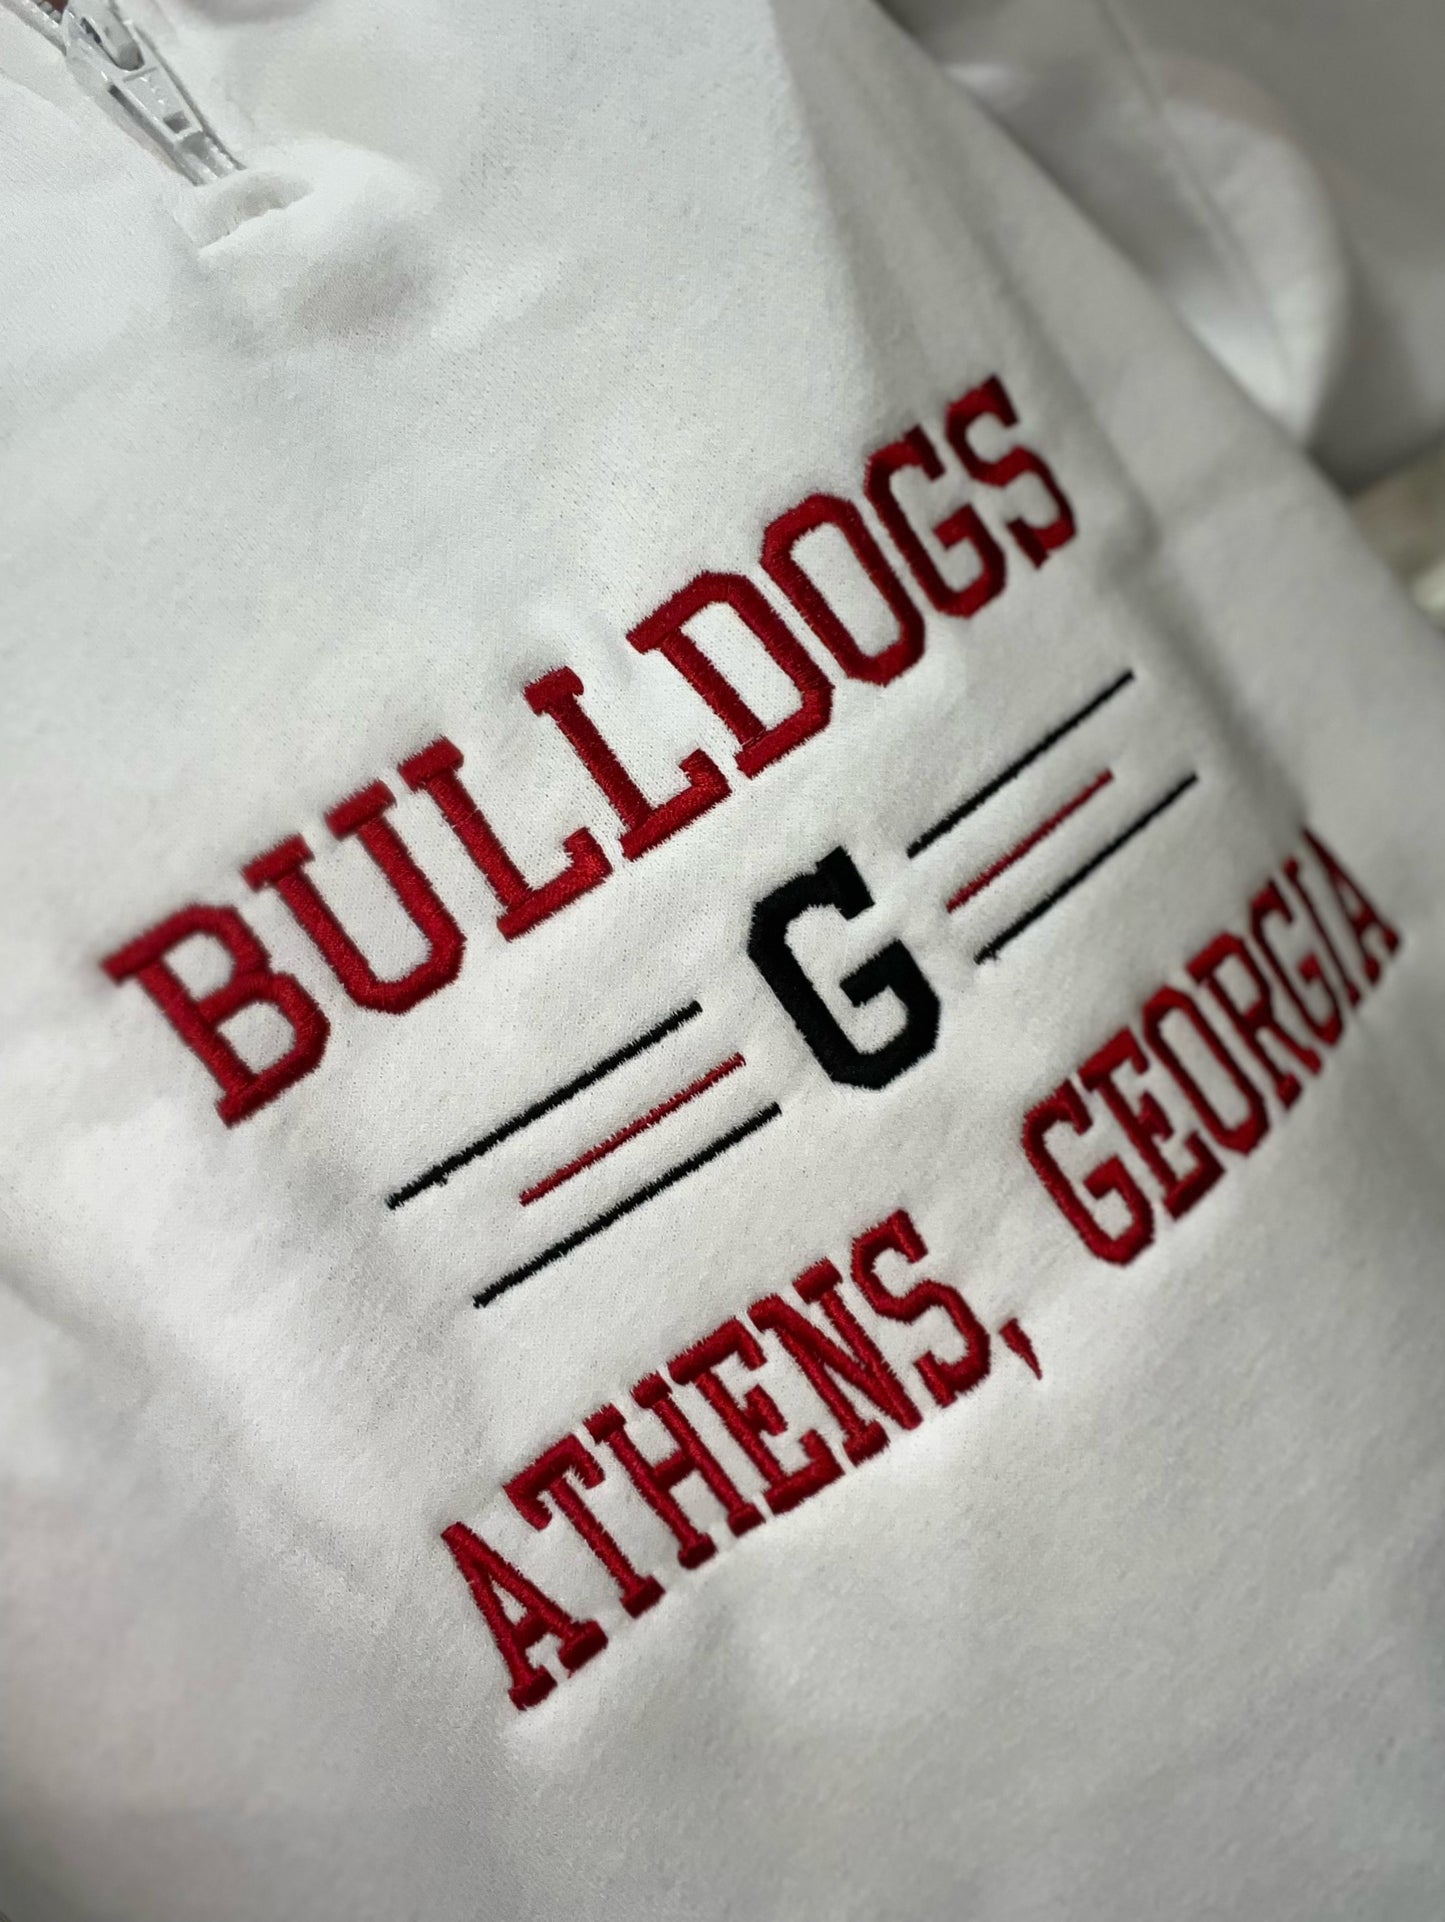 Home of the Dawgs Quarter Zip